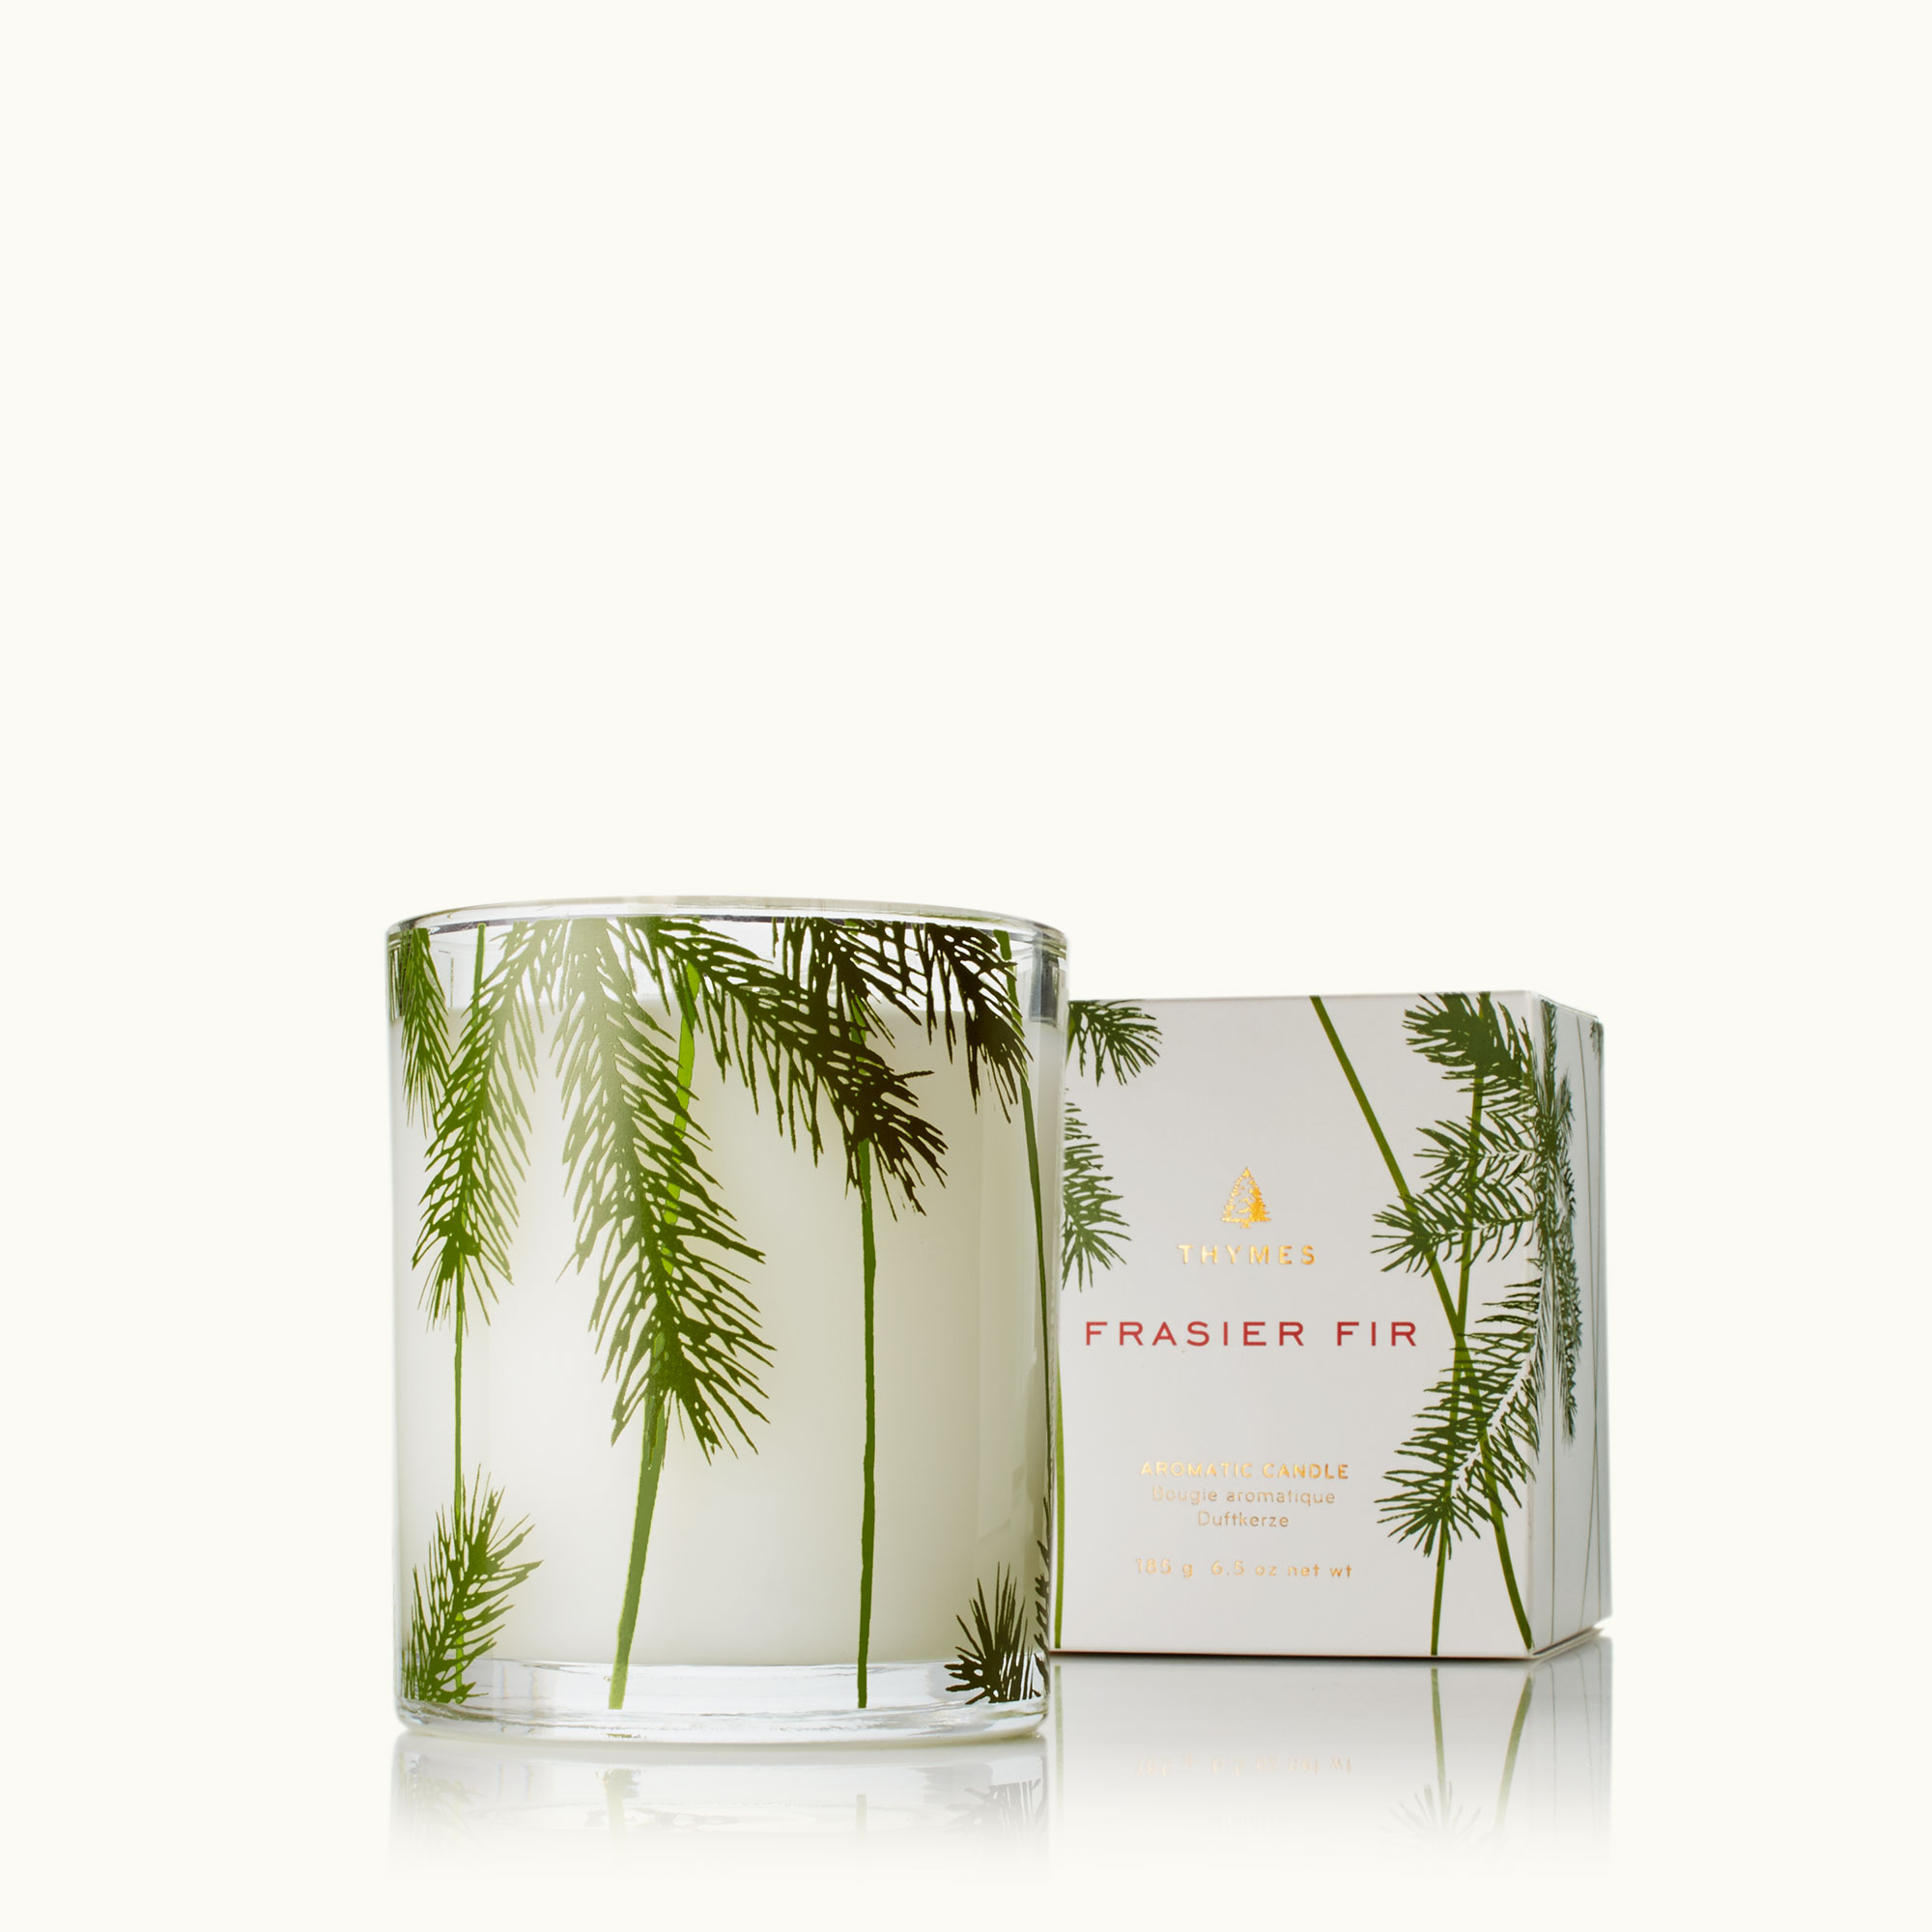  Thymes Frasier Fir Pine Needle Candle - Highly Scented Candles  for a Luxury Home Fragrance - Holiday Candles with a Forest Fragrance -  Single-Wick Candle (6.5 oz) : Home & Kitchen